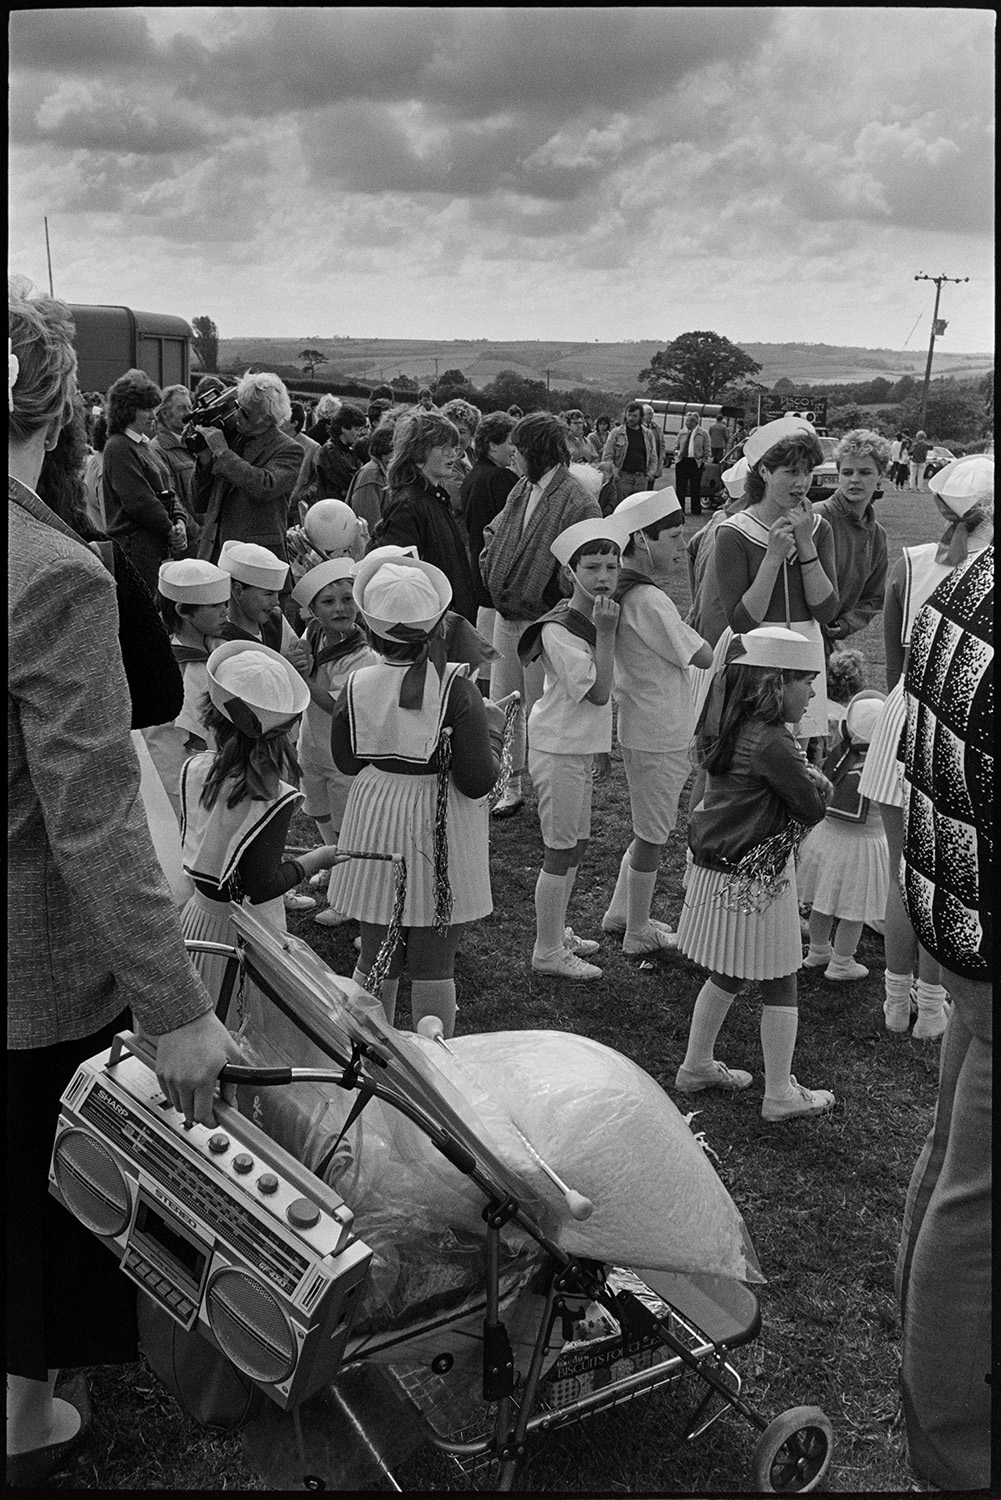 School fete, drum majorettes competition, early tractor display, mothers and children.
[People gathered in a field for the Chulmleigh School Fete. A group of majorettes are getting ready to perform. A woman with a pram and tape player is visible in the foreground.]